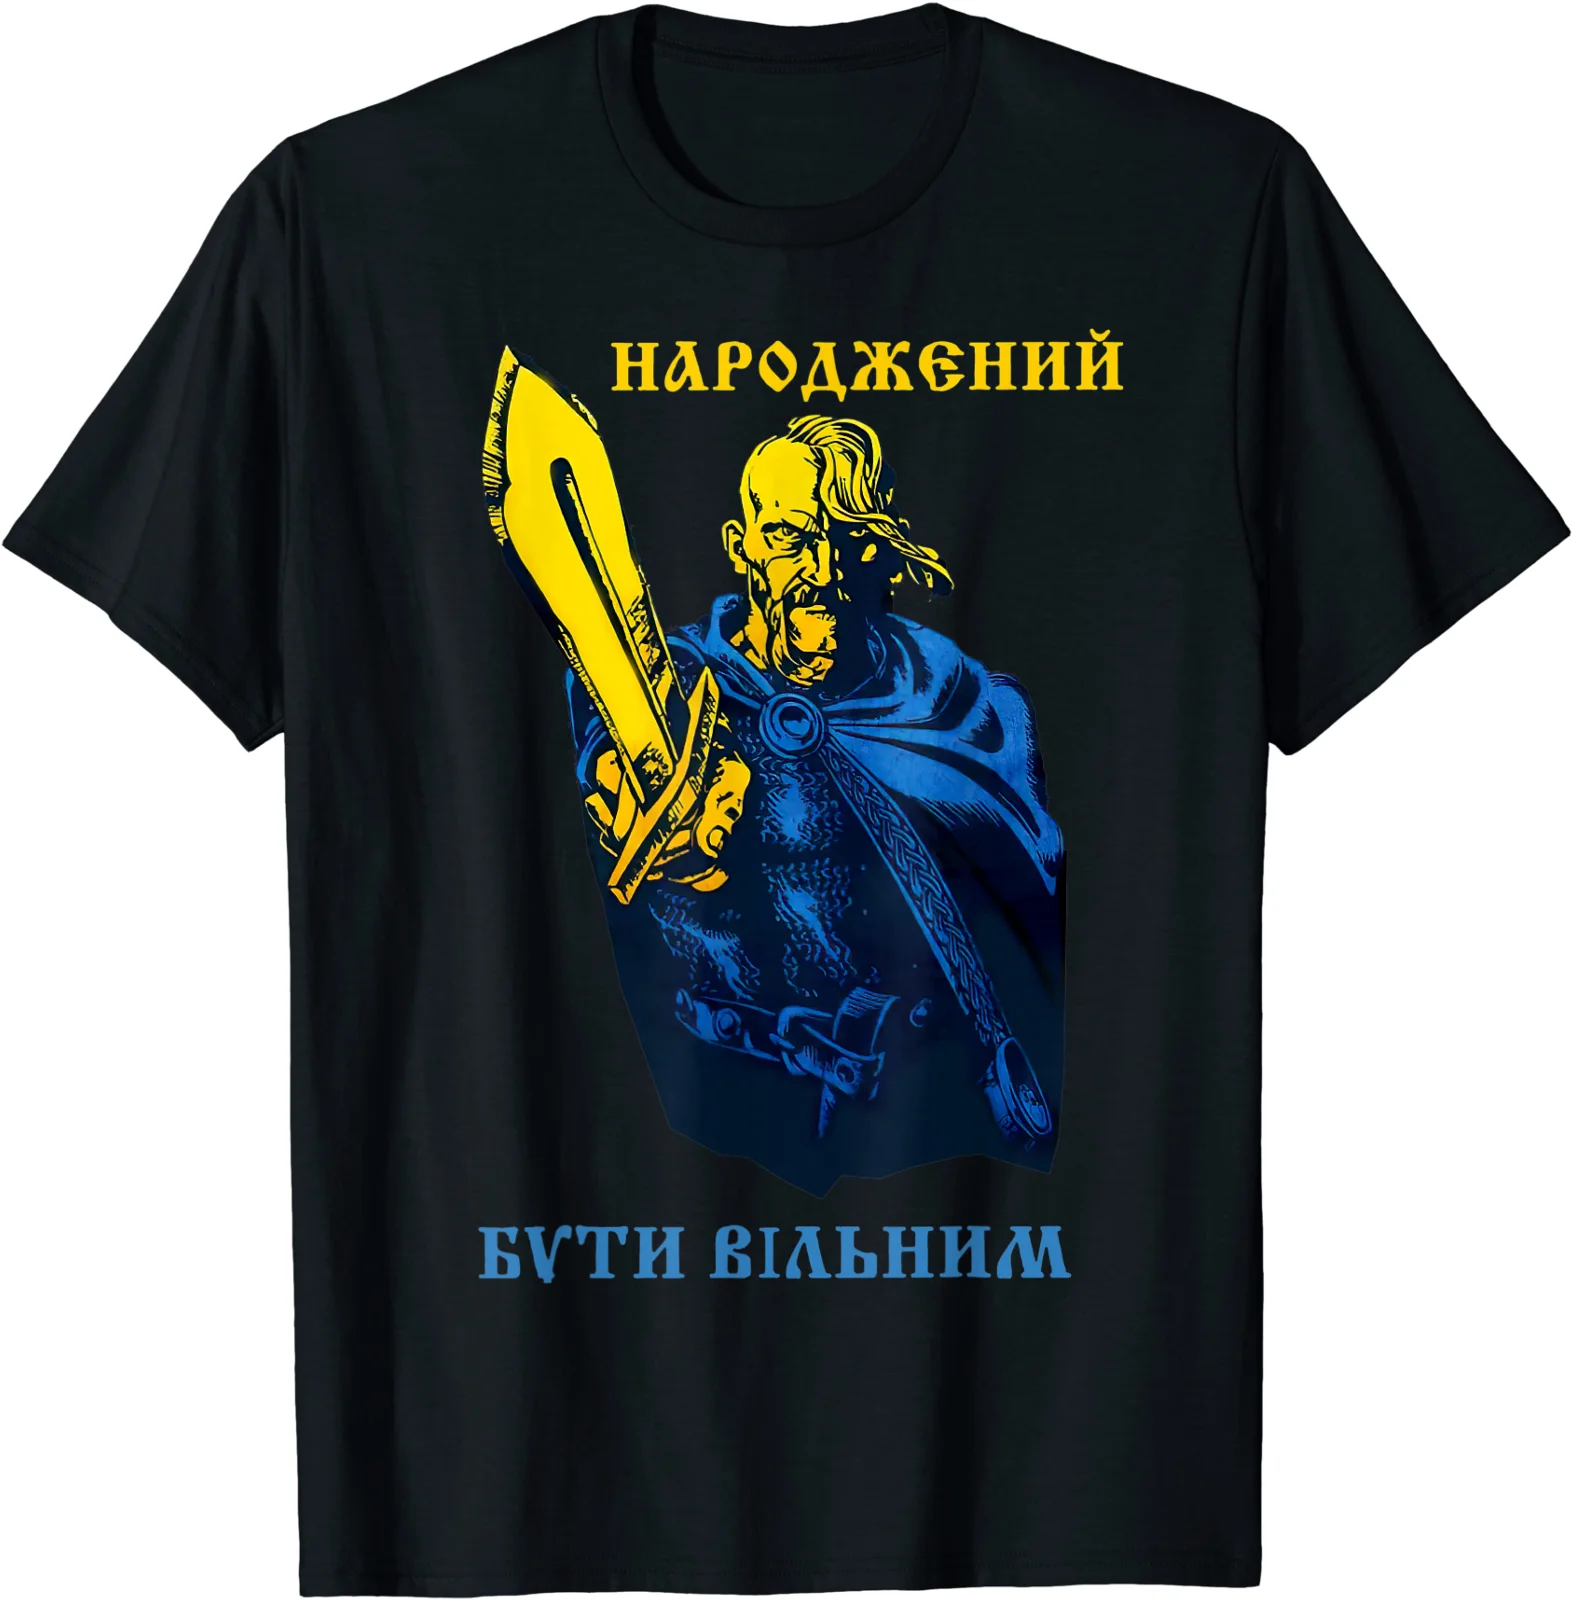 

Live-Free or Die Ukrainian Cossack Warrior T Shirt. Short Sleeve 100% Cotton Casual T-shirts Loose Top Size S-3XL